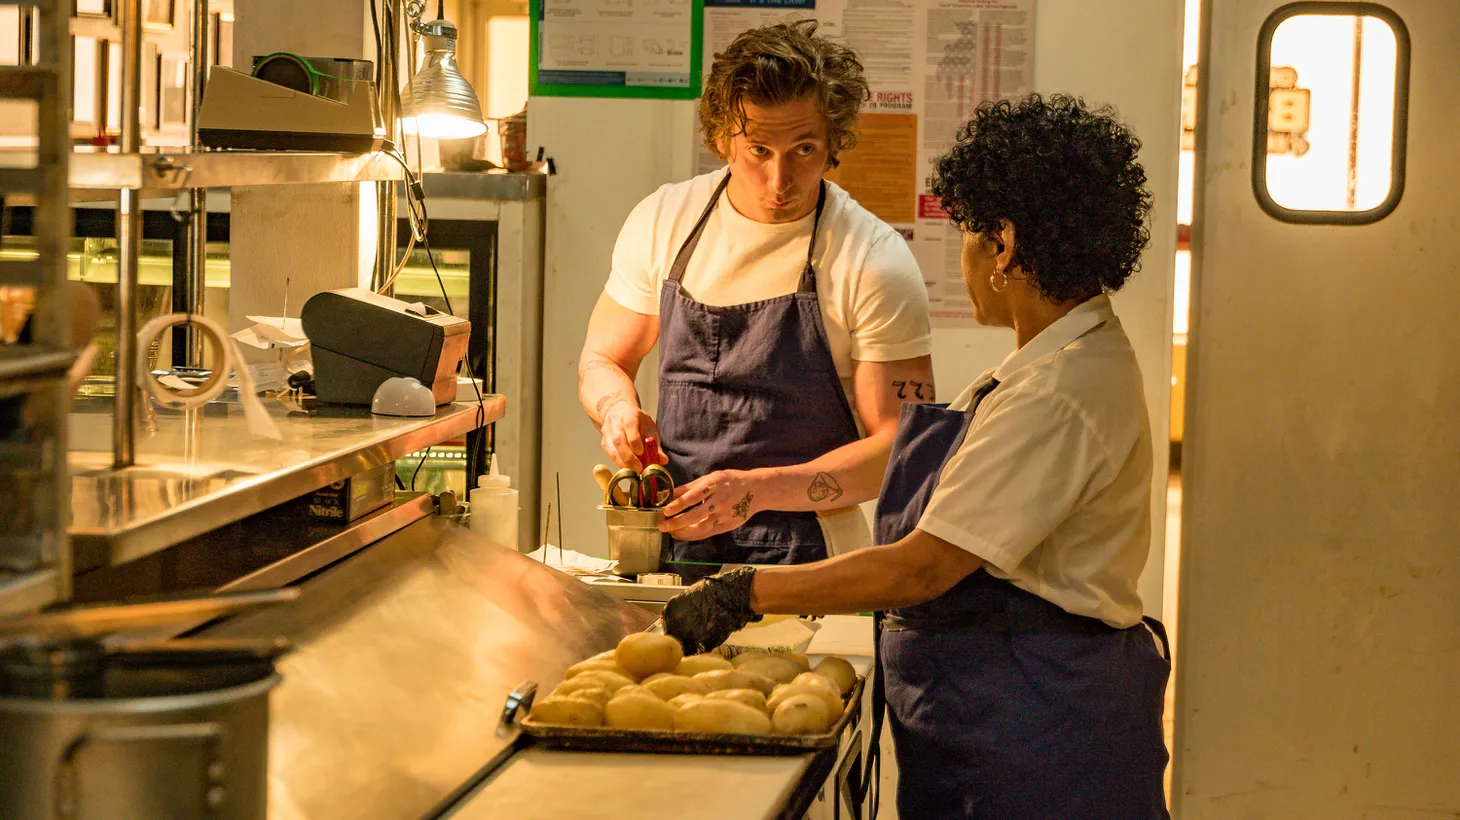 “For Carmy, my heart just kind of broke for him,” says actor Jeremy Allen White, who plays a chef returning home to run his family’s sandwich shop in the FX series, “The Bear.”